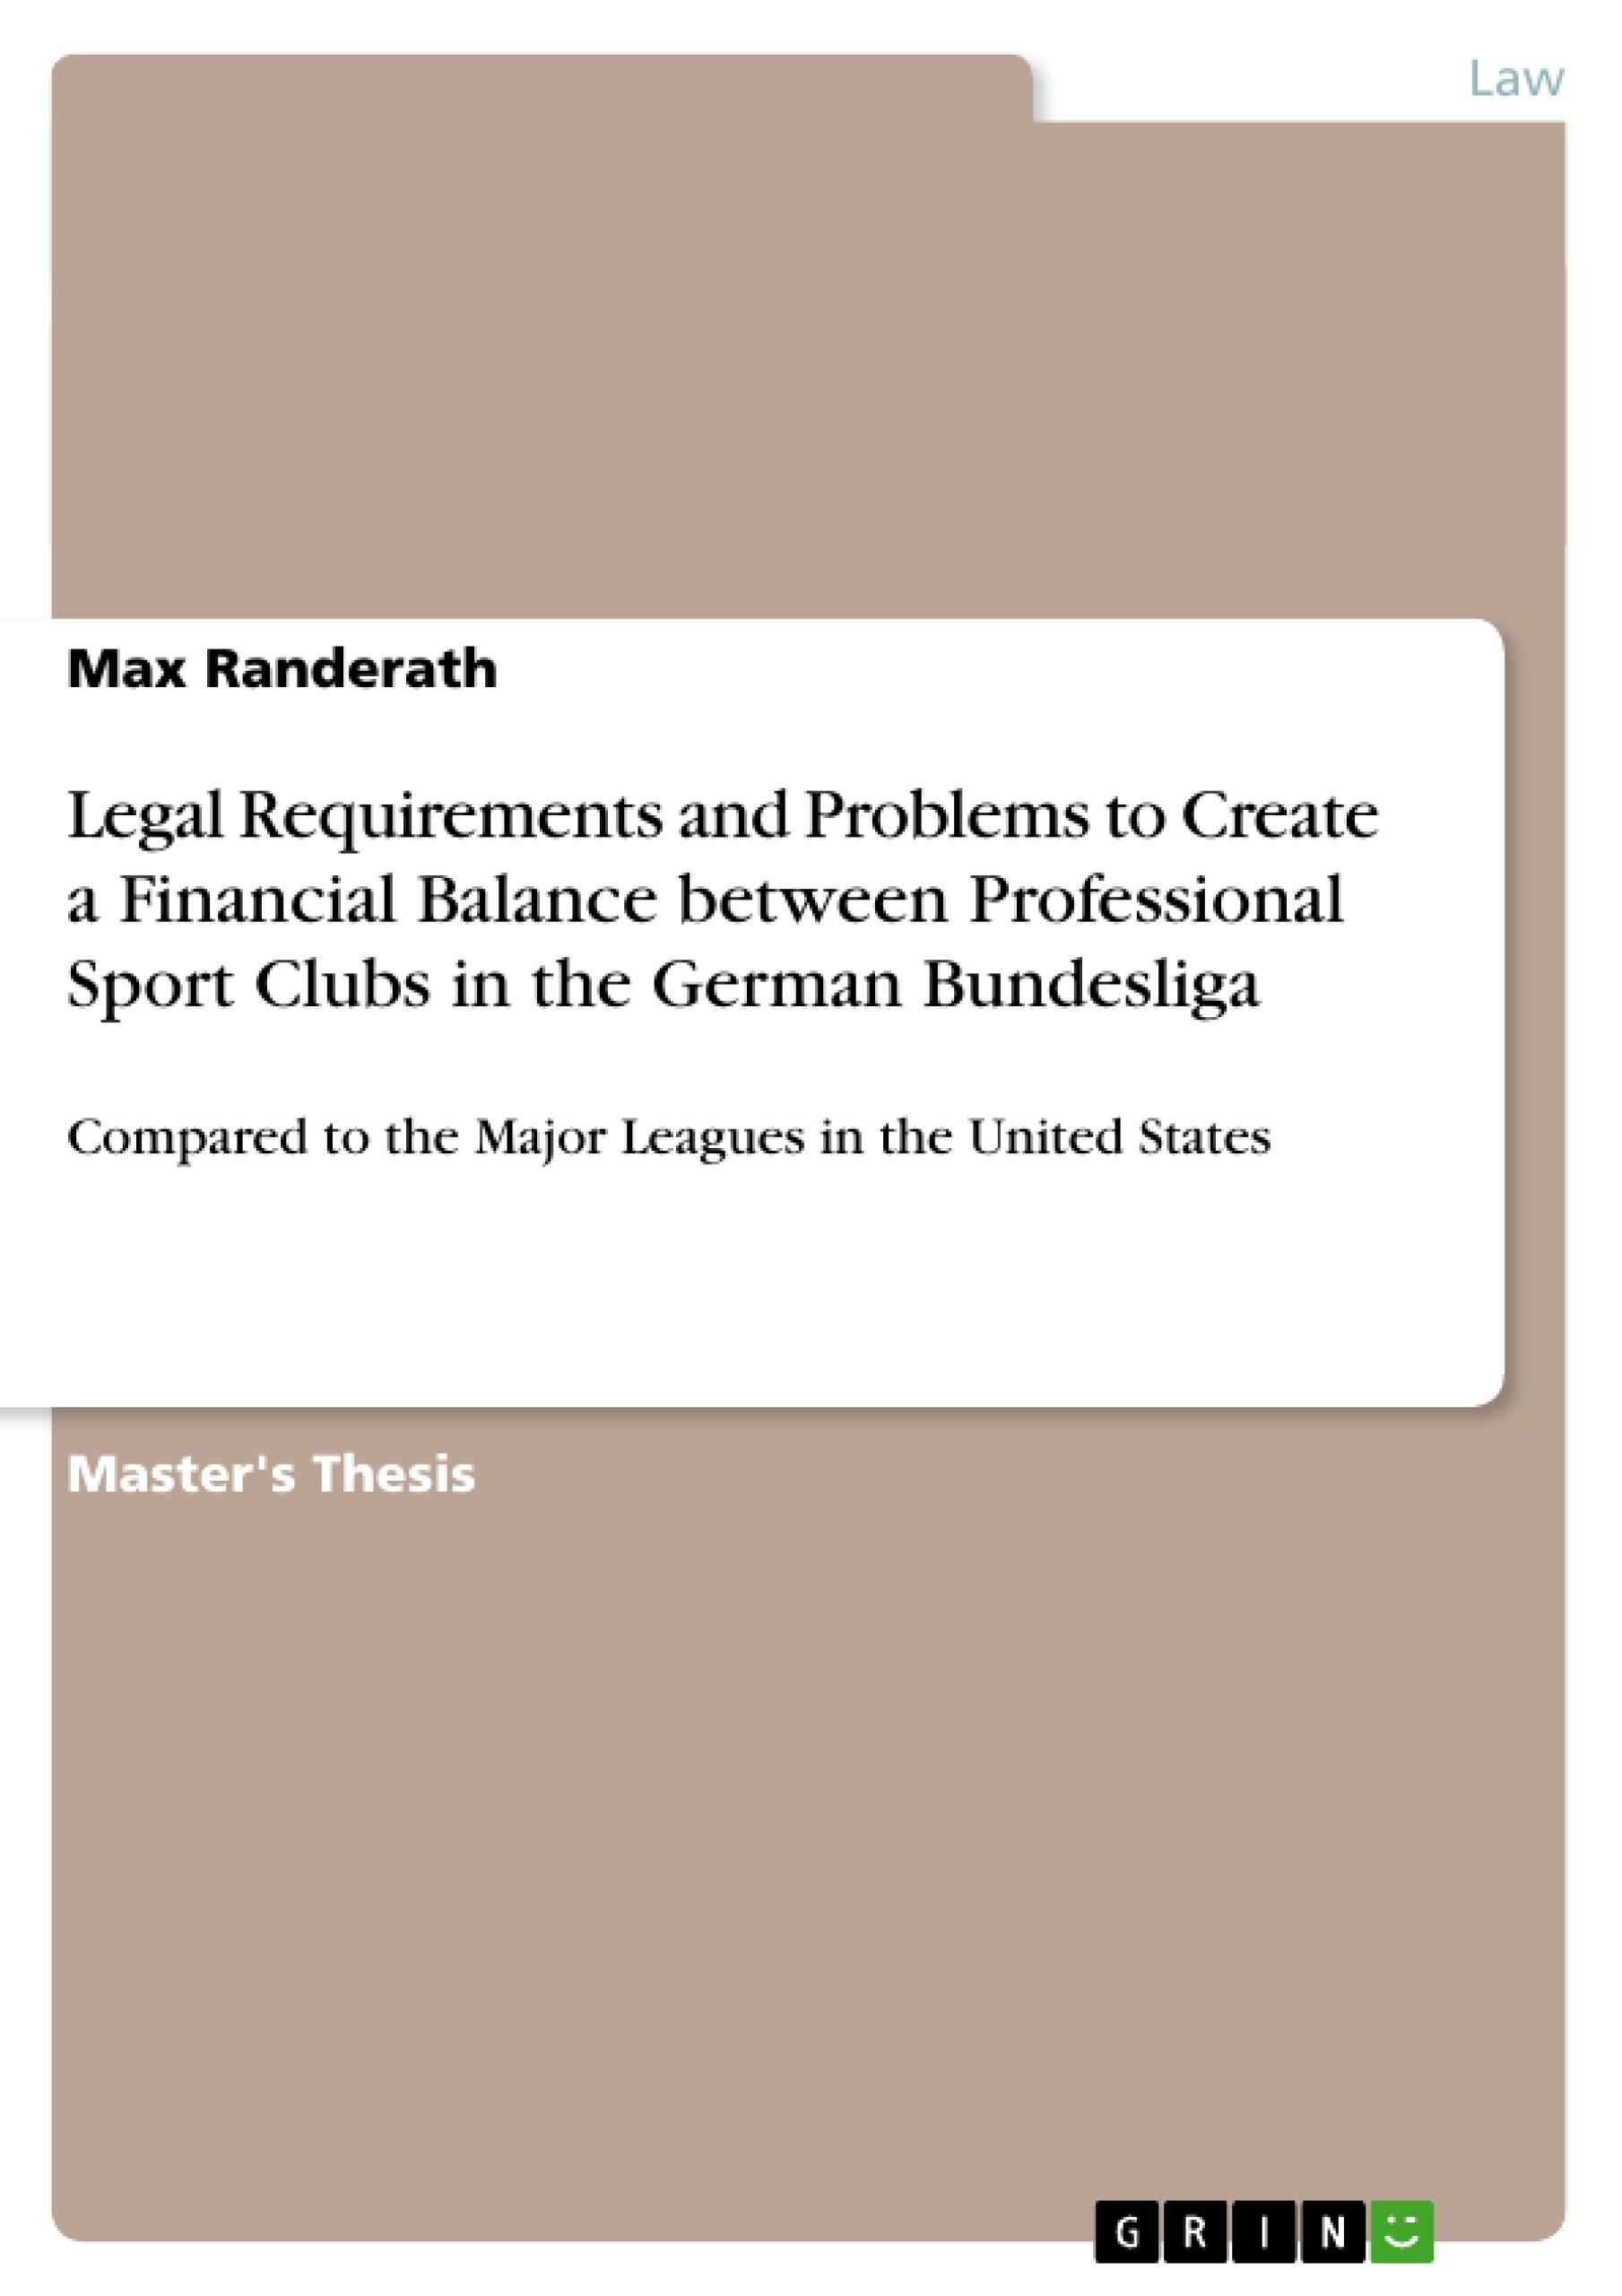 Title: Legal Requirements and Problems to Create a Financial Balance between Professional Sport Clubs in the German Bundesliga